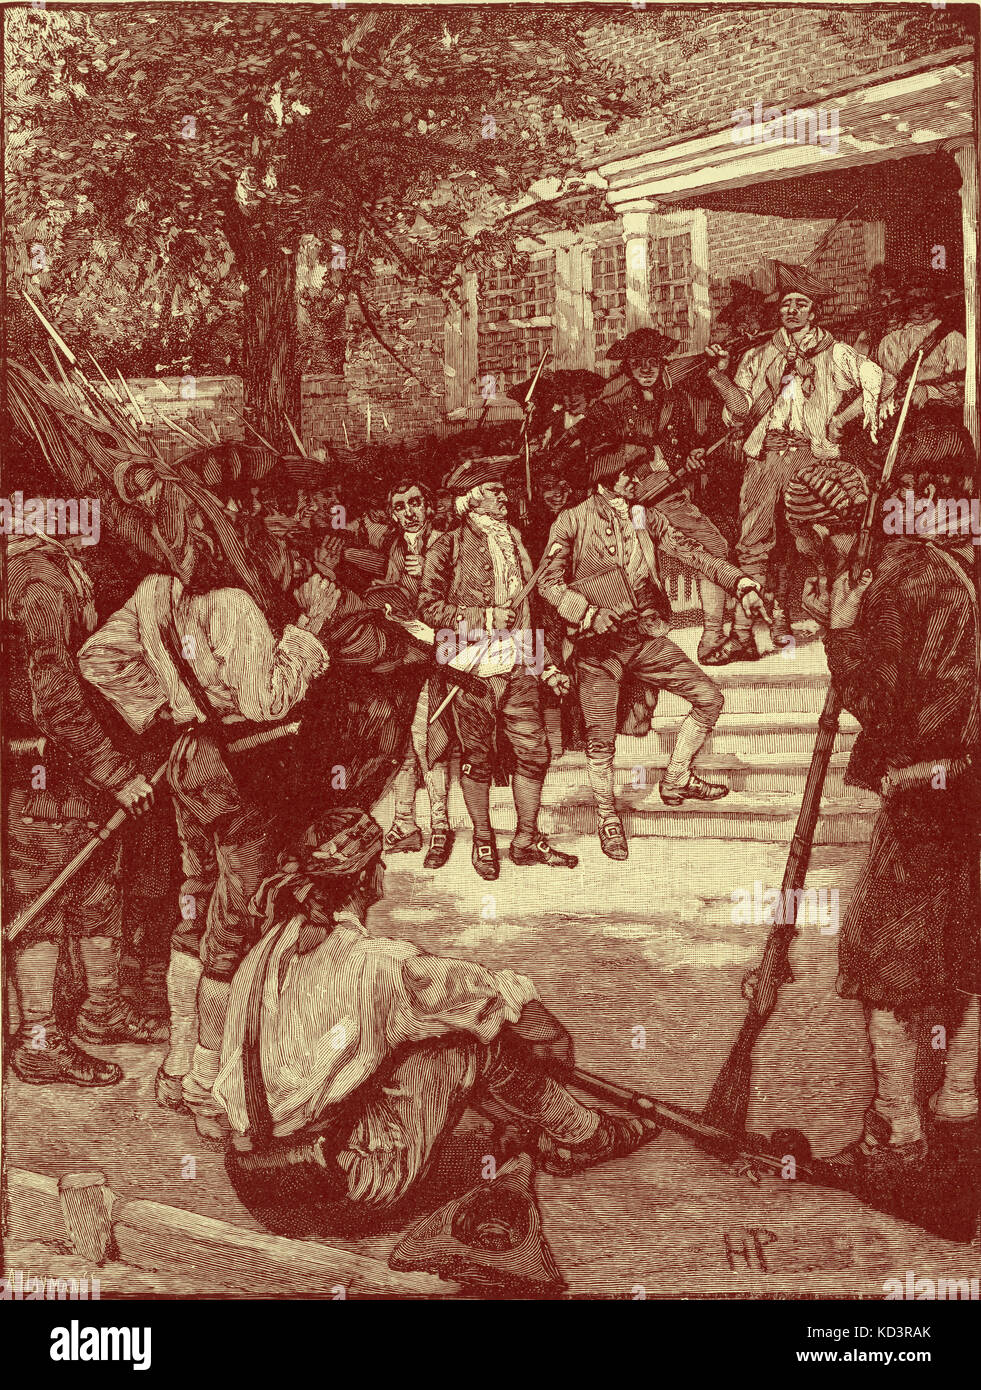 Shays' mob in possession of a courthouse. Rebellion by the people demanding paper money in Massachusetts led by Daniel Shays, 1786. Illustration by Howard Pyle, 1896 Stock Photo